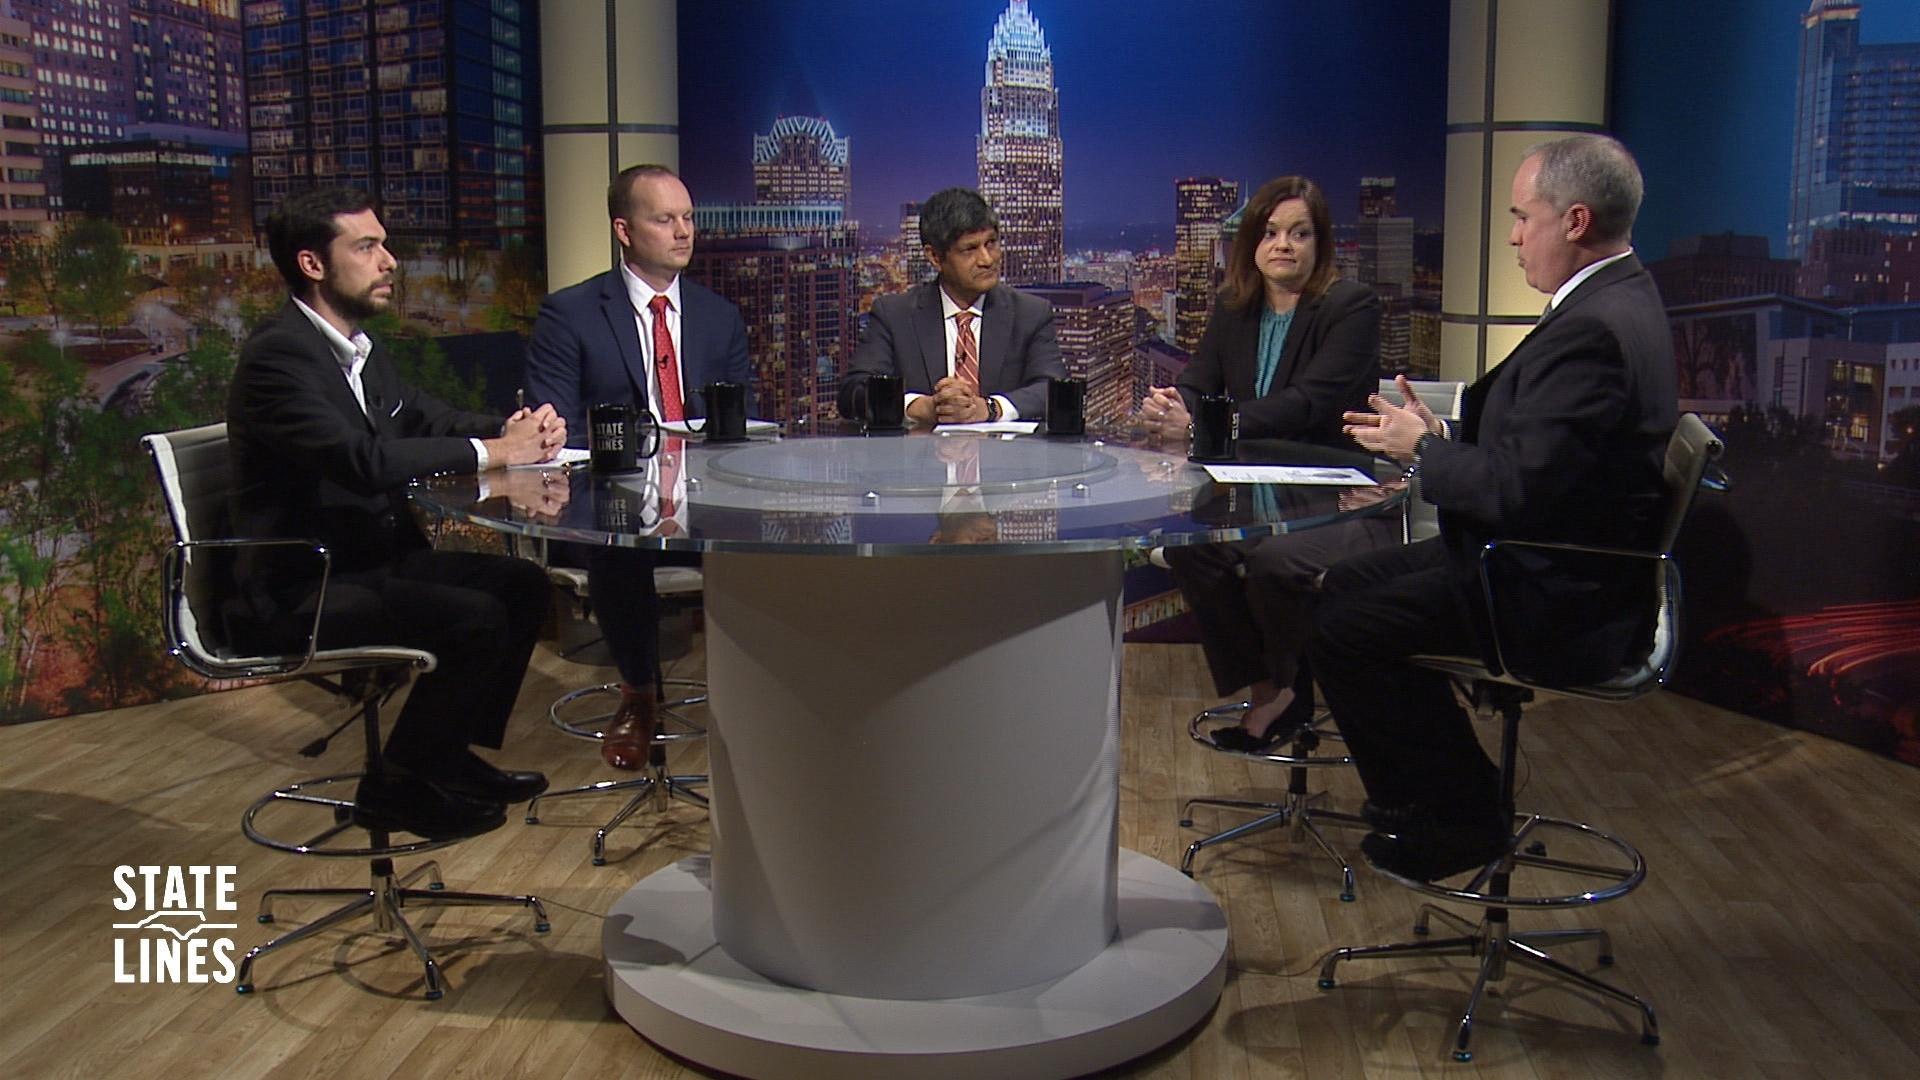 Sitting around the State Lines round table are Rep. Allen Chesser (R-District 25), Sen. Jay Chaudhuri (D-District 15), Dawn Vaughan (News & Observer), Nick Craig (Wilmington’s Morning News) and State Lines host, Kelly McCullen.